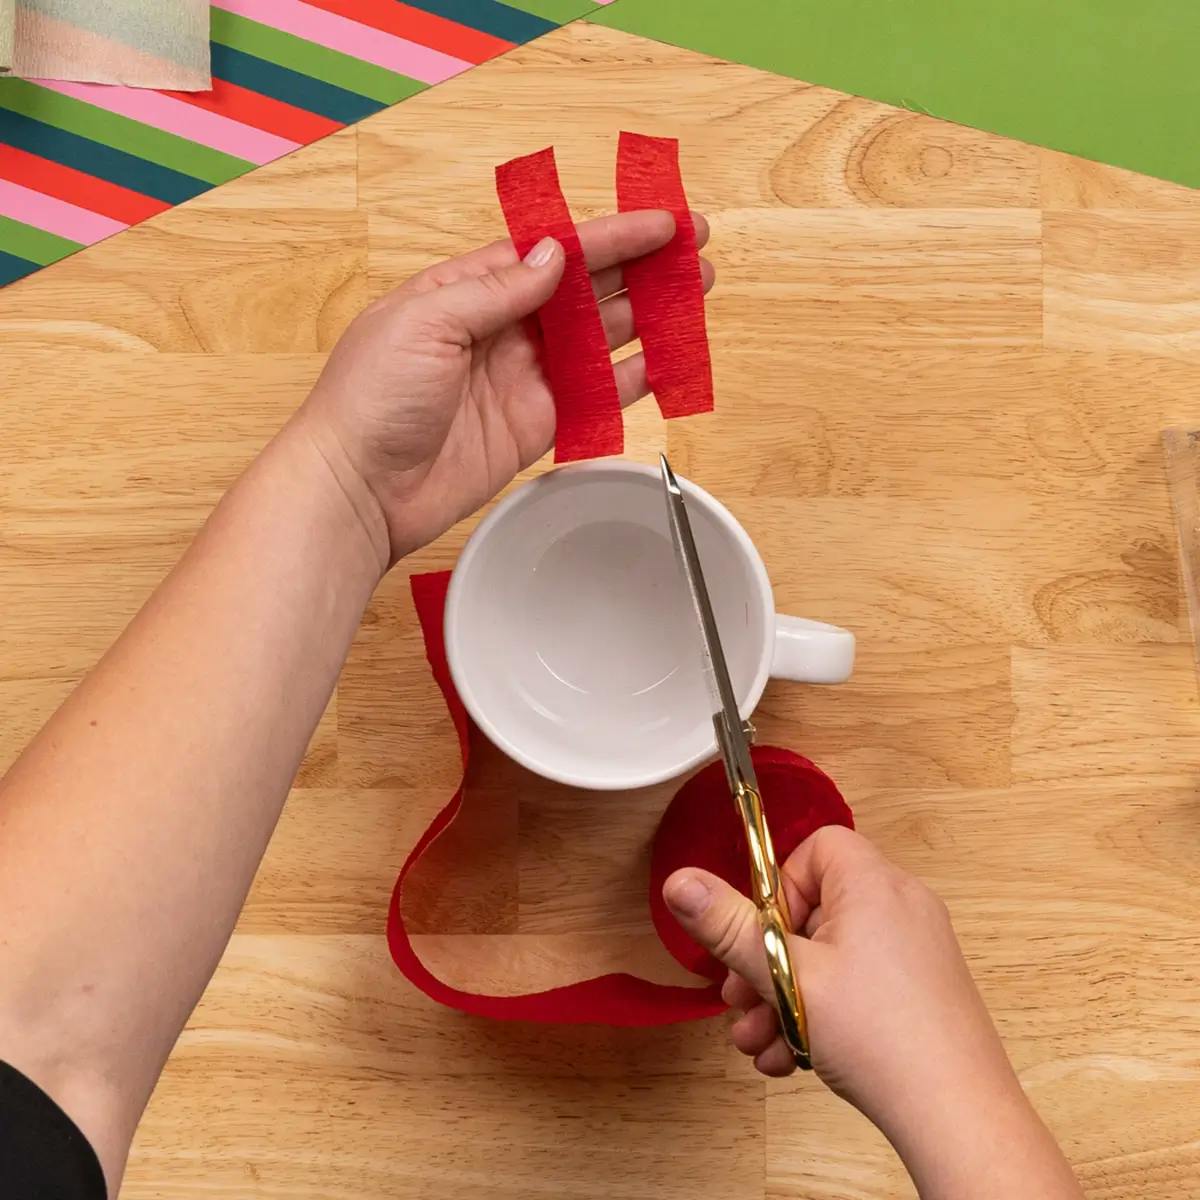 Cutting strips of crepe paper to cover the handle of a mug, as part of a tutorial on how to wrap a mug or coffee cup.